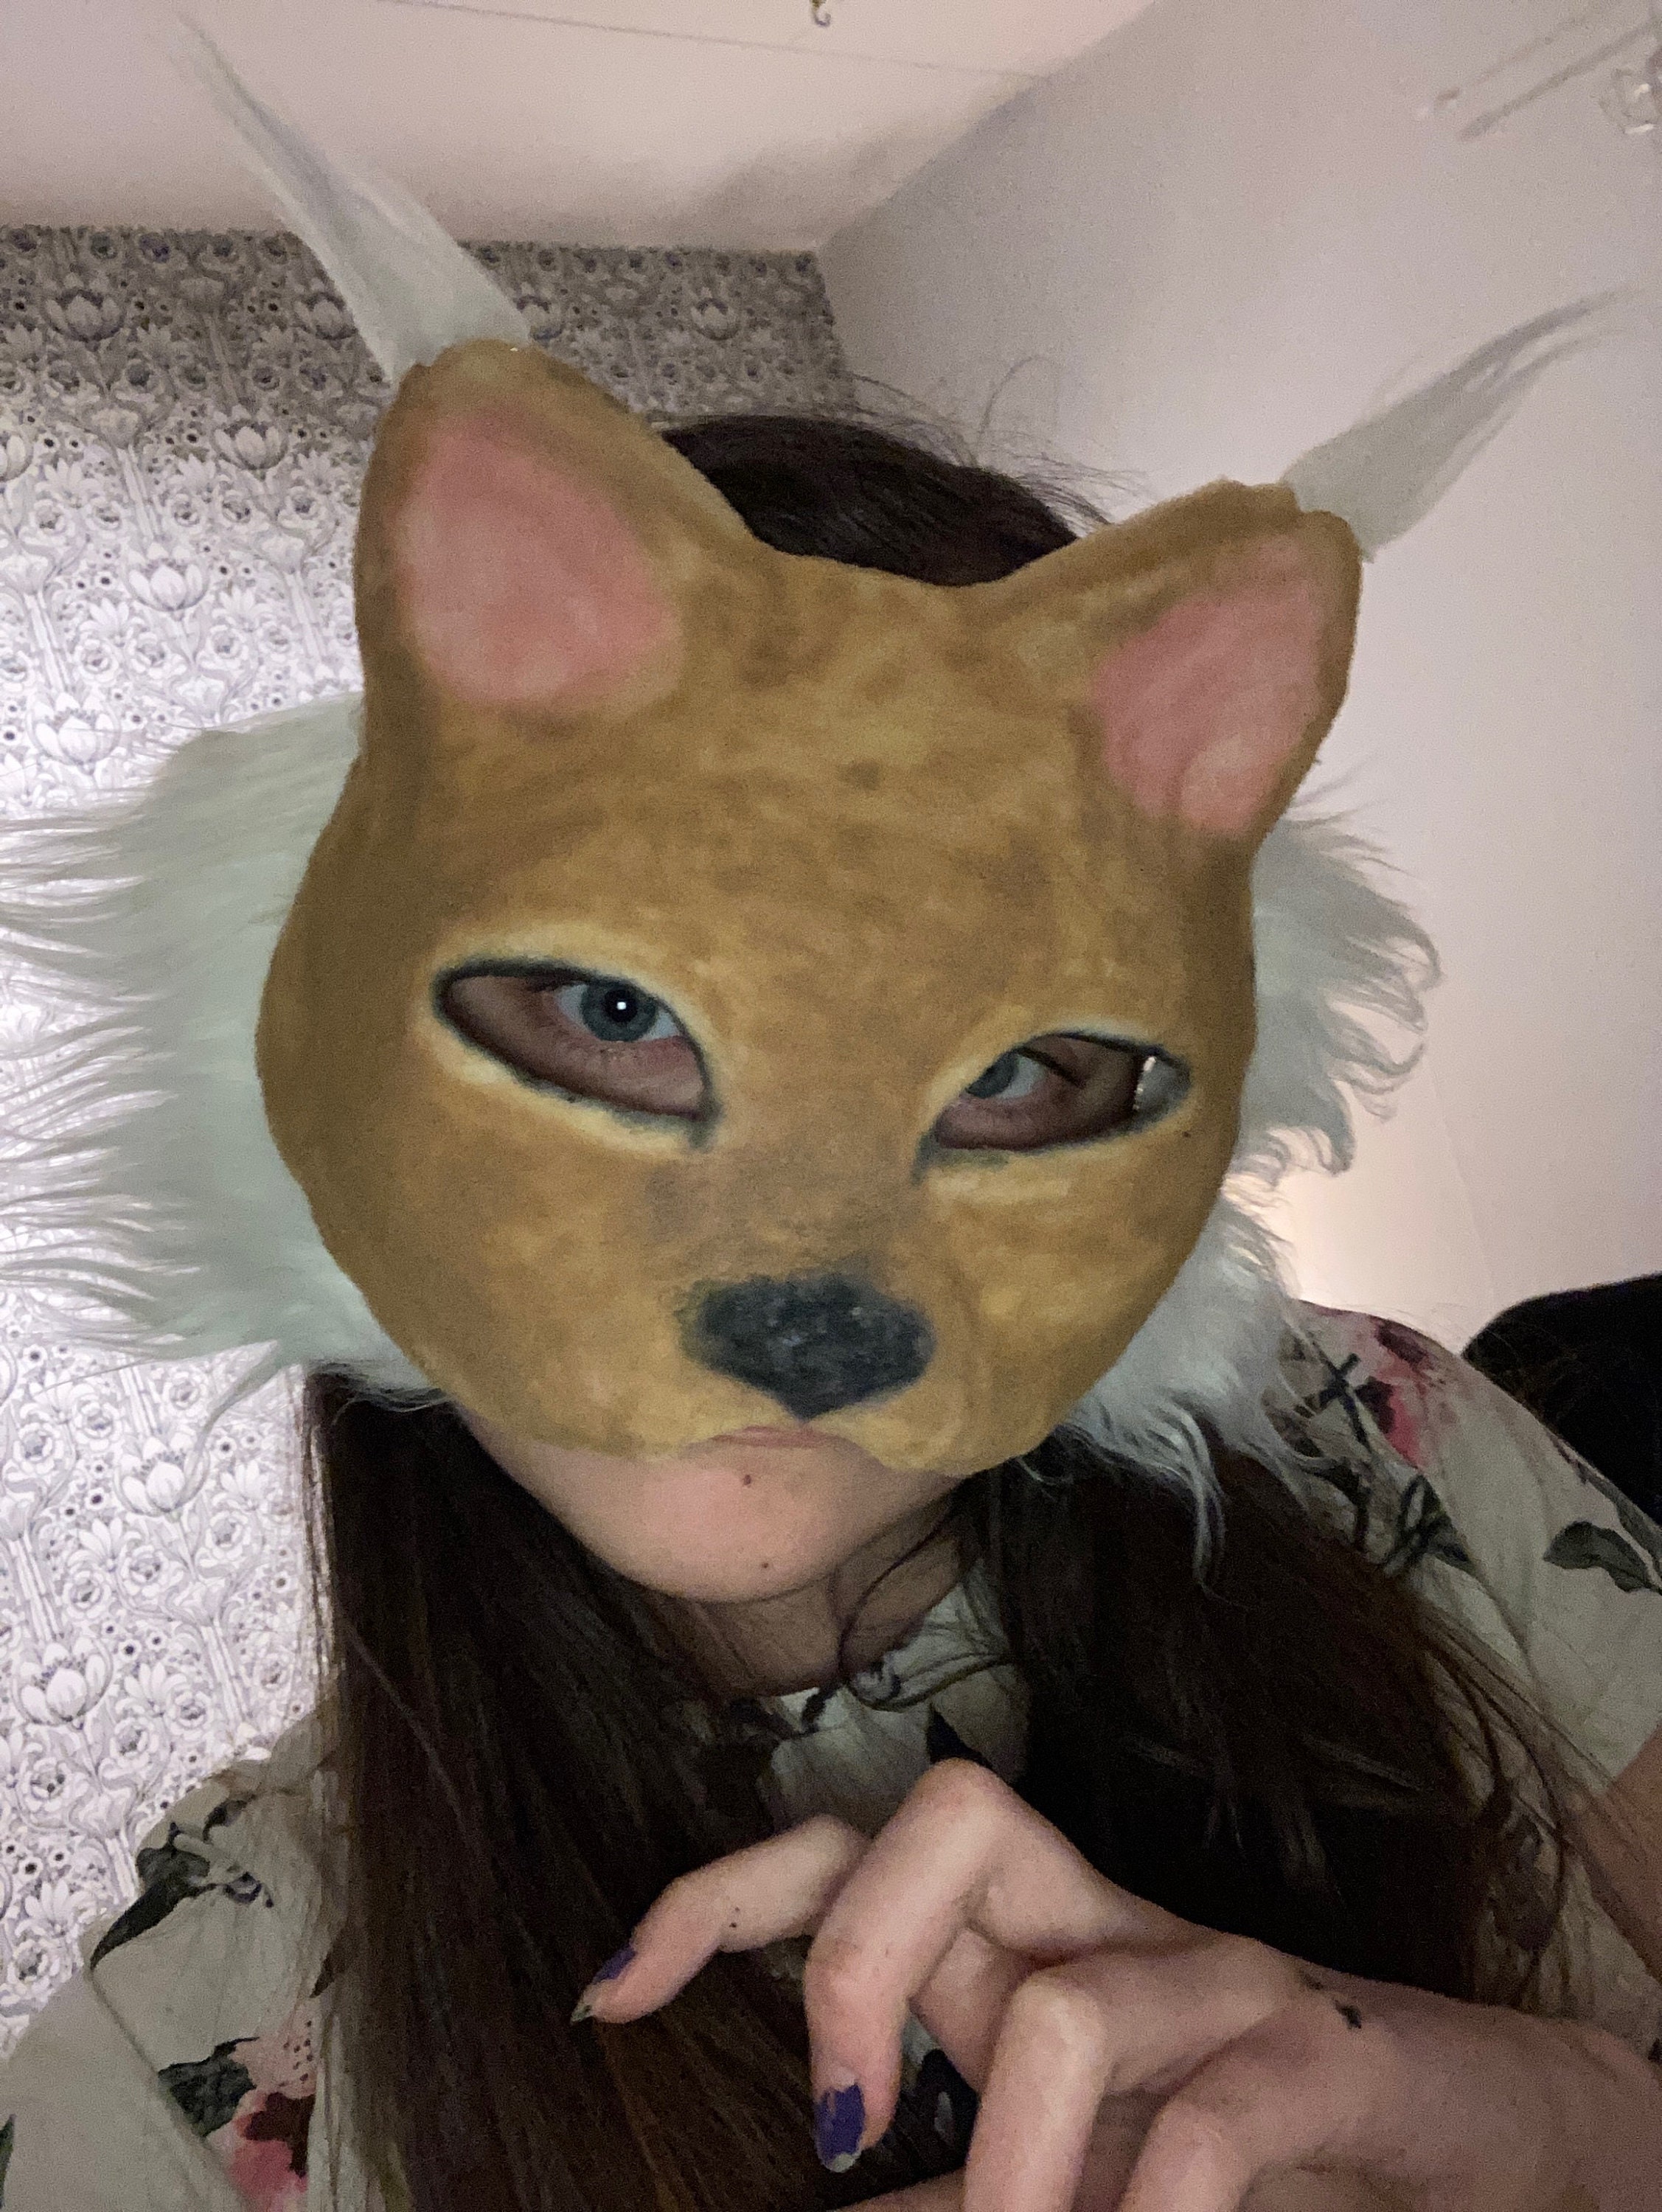 Brindle Pattern Felted Cat Mask Therian Gear 